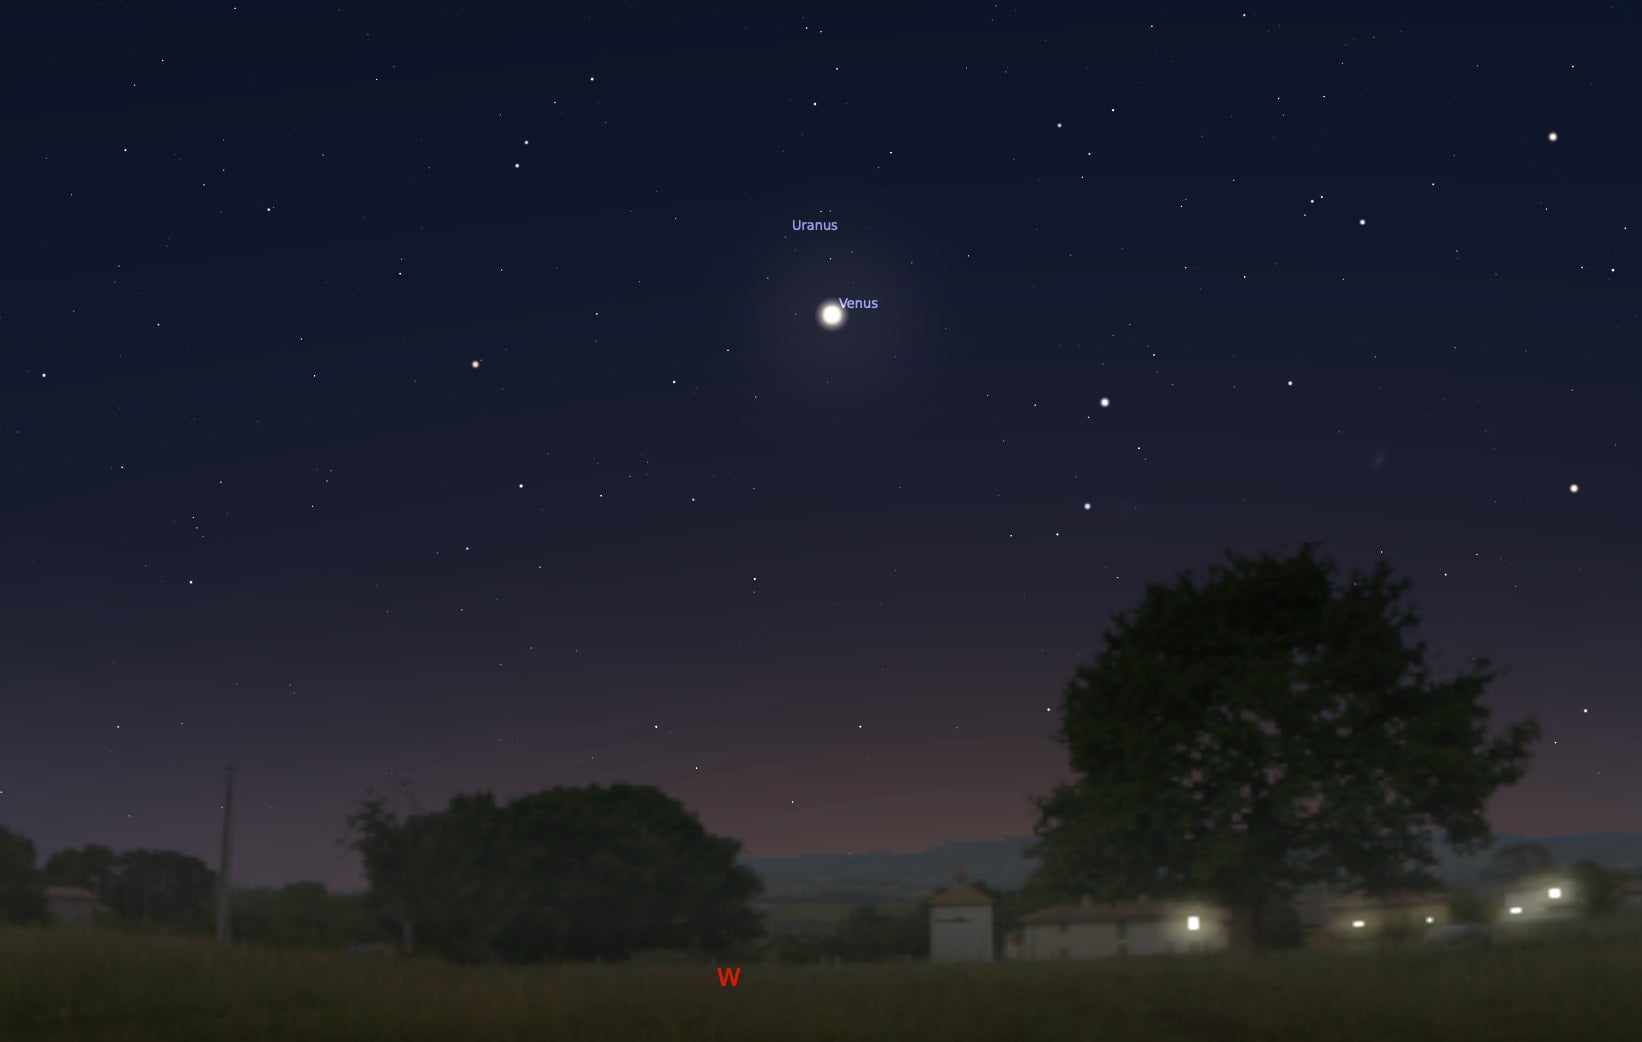 A horizon at night, with Venus high up in the sky and Uranus just above it, as they'll appear in the Tuesday, March 28, 2023 planetary alignment.